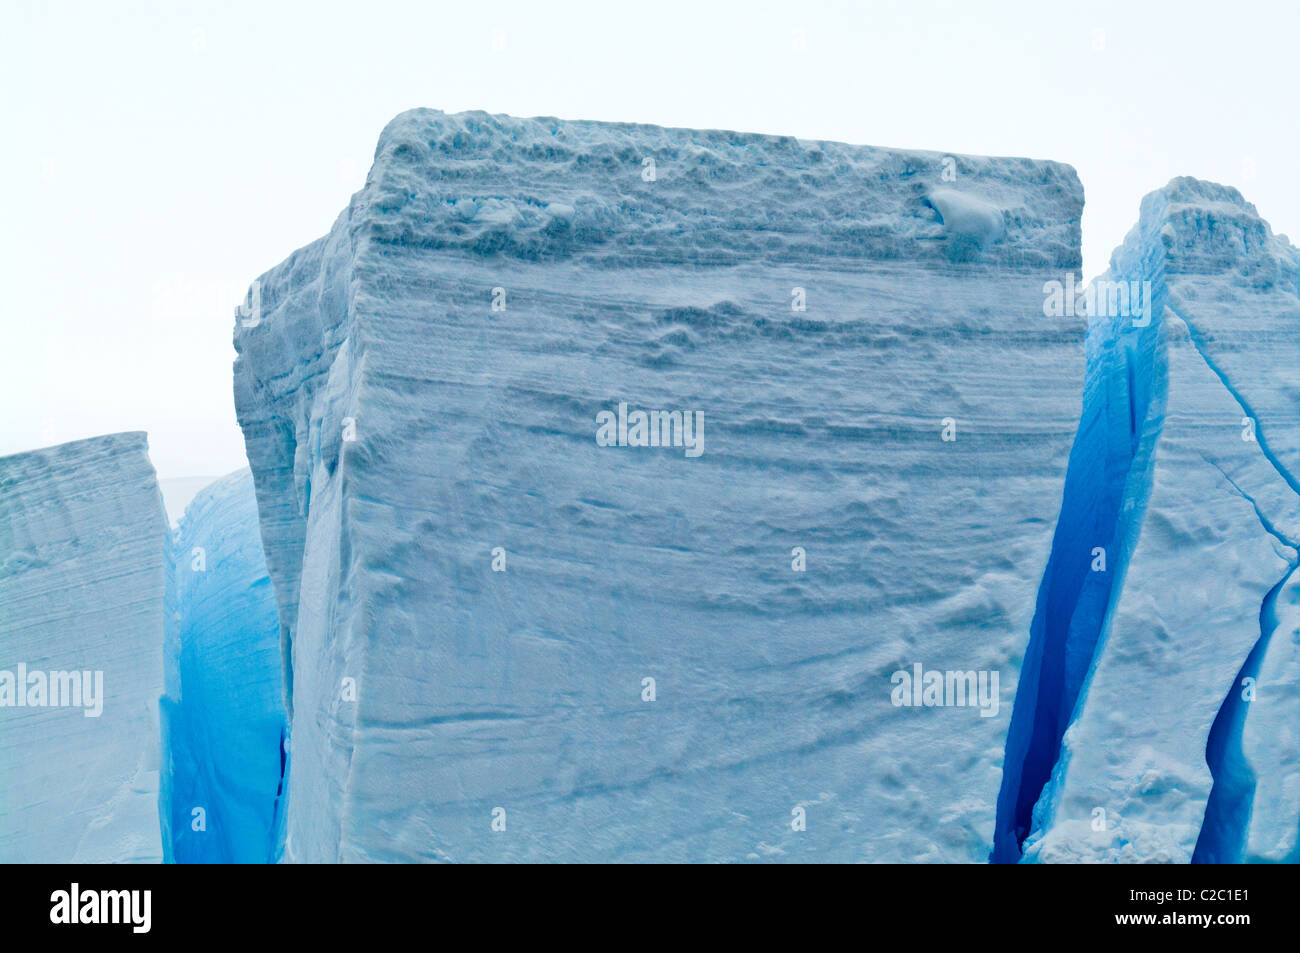 The fracture zone of massive glacial ice cliffs teeter over icy seas. Stock Photo